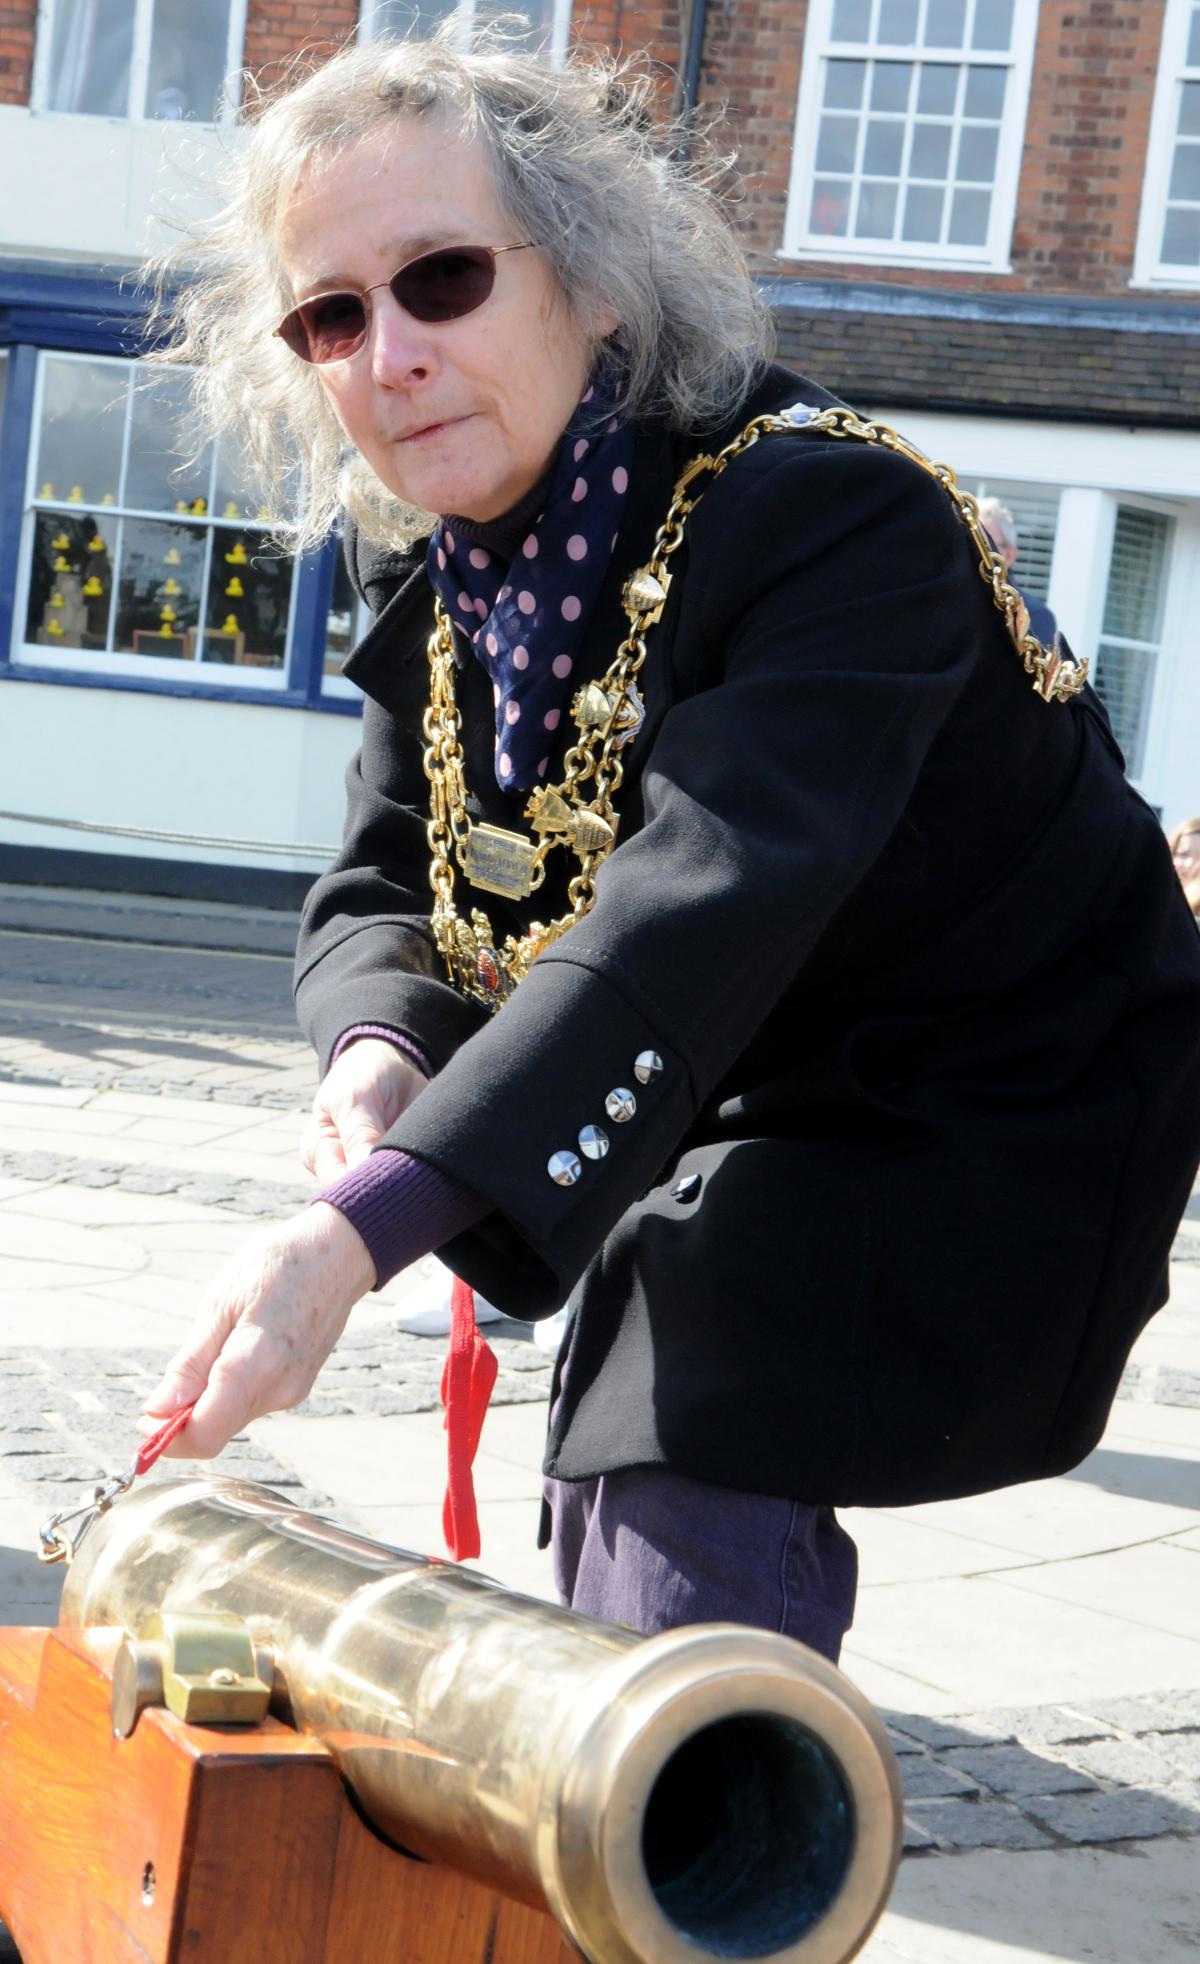 The Mayor of Bewdley, Calne Edginton-White, fires the starting fun for Bewdley Duck Race